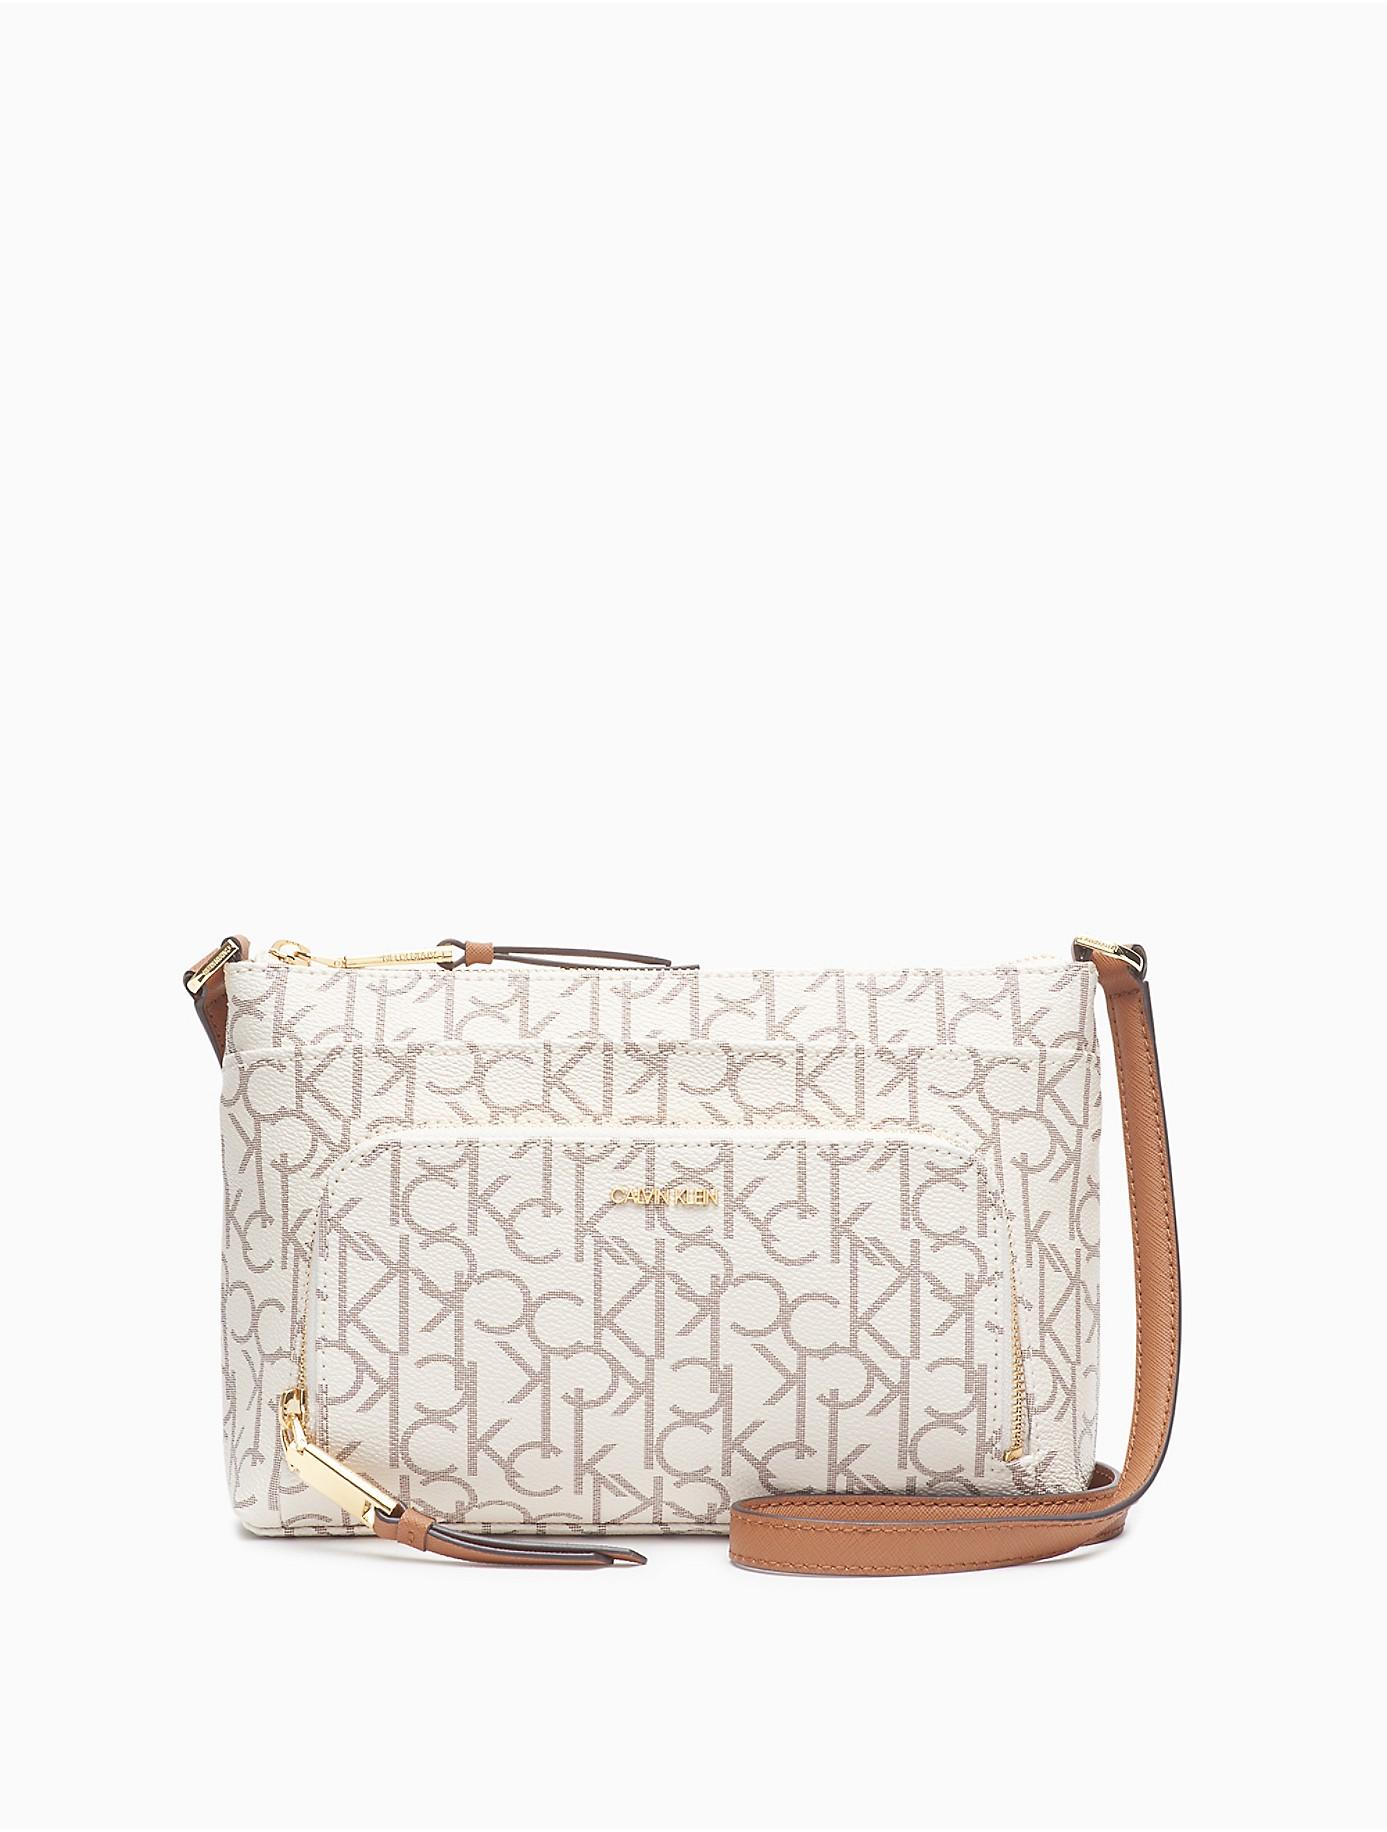 Calvin Klein Lily Signature Crossbody in Natural | Lyst